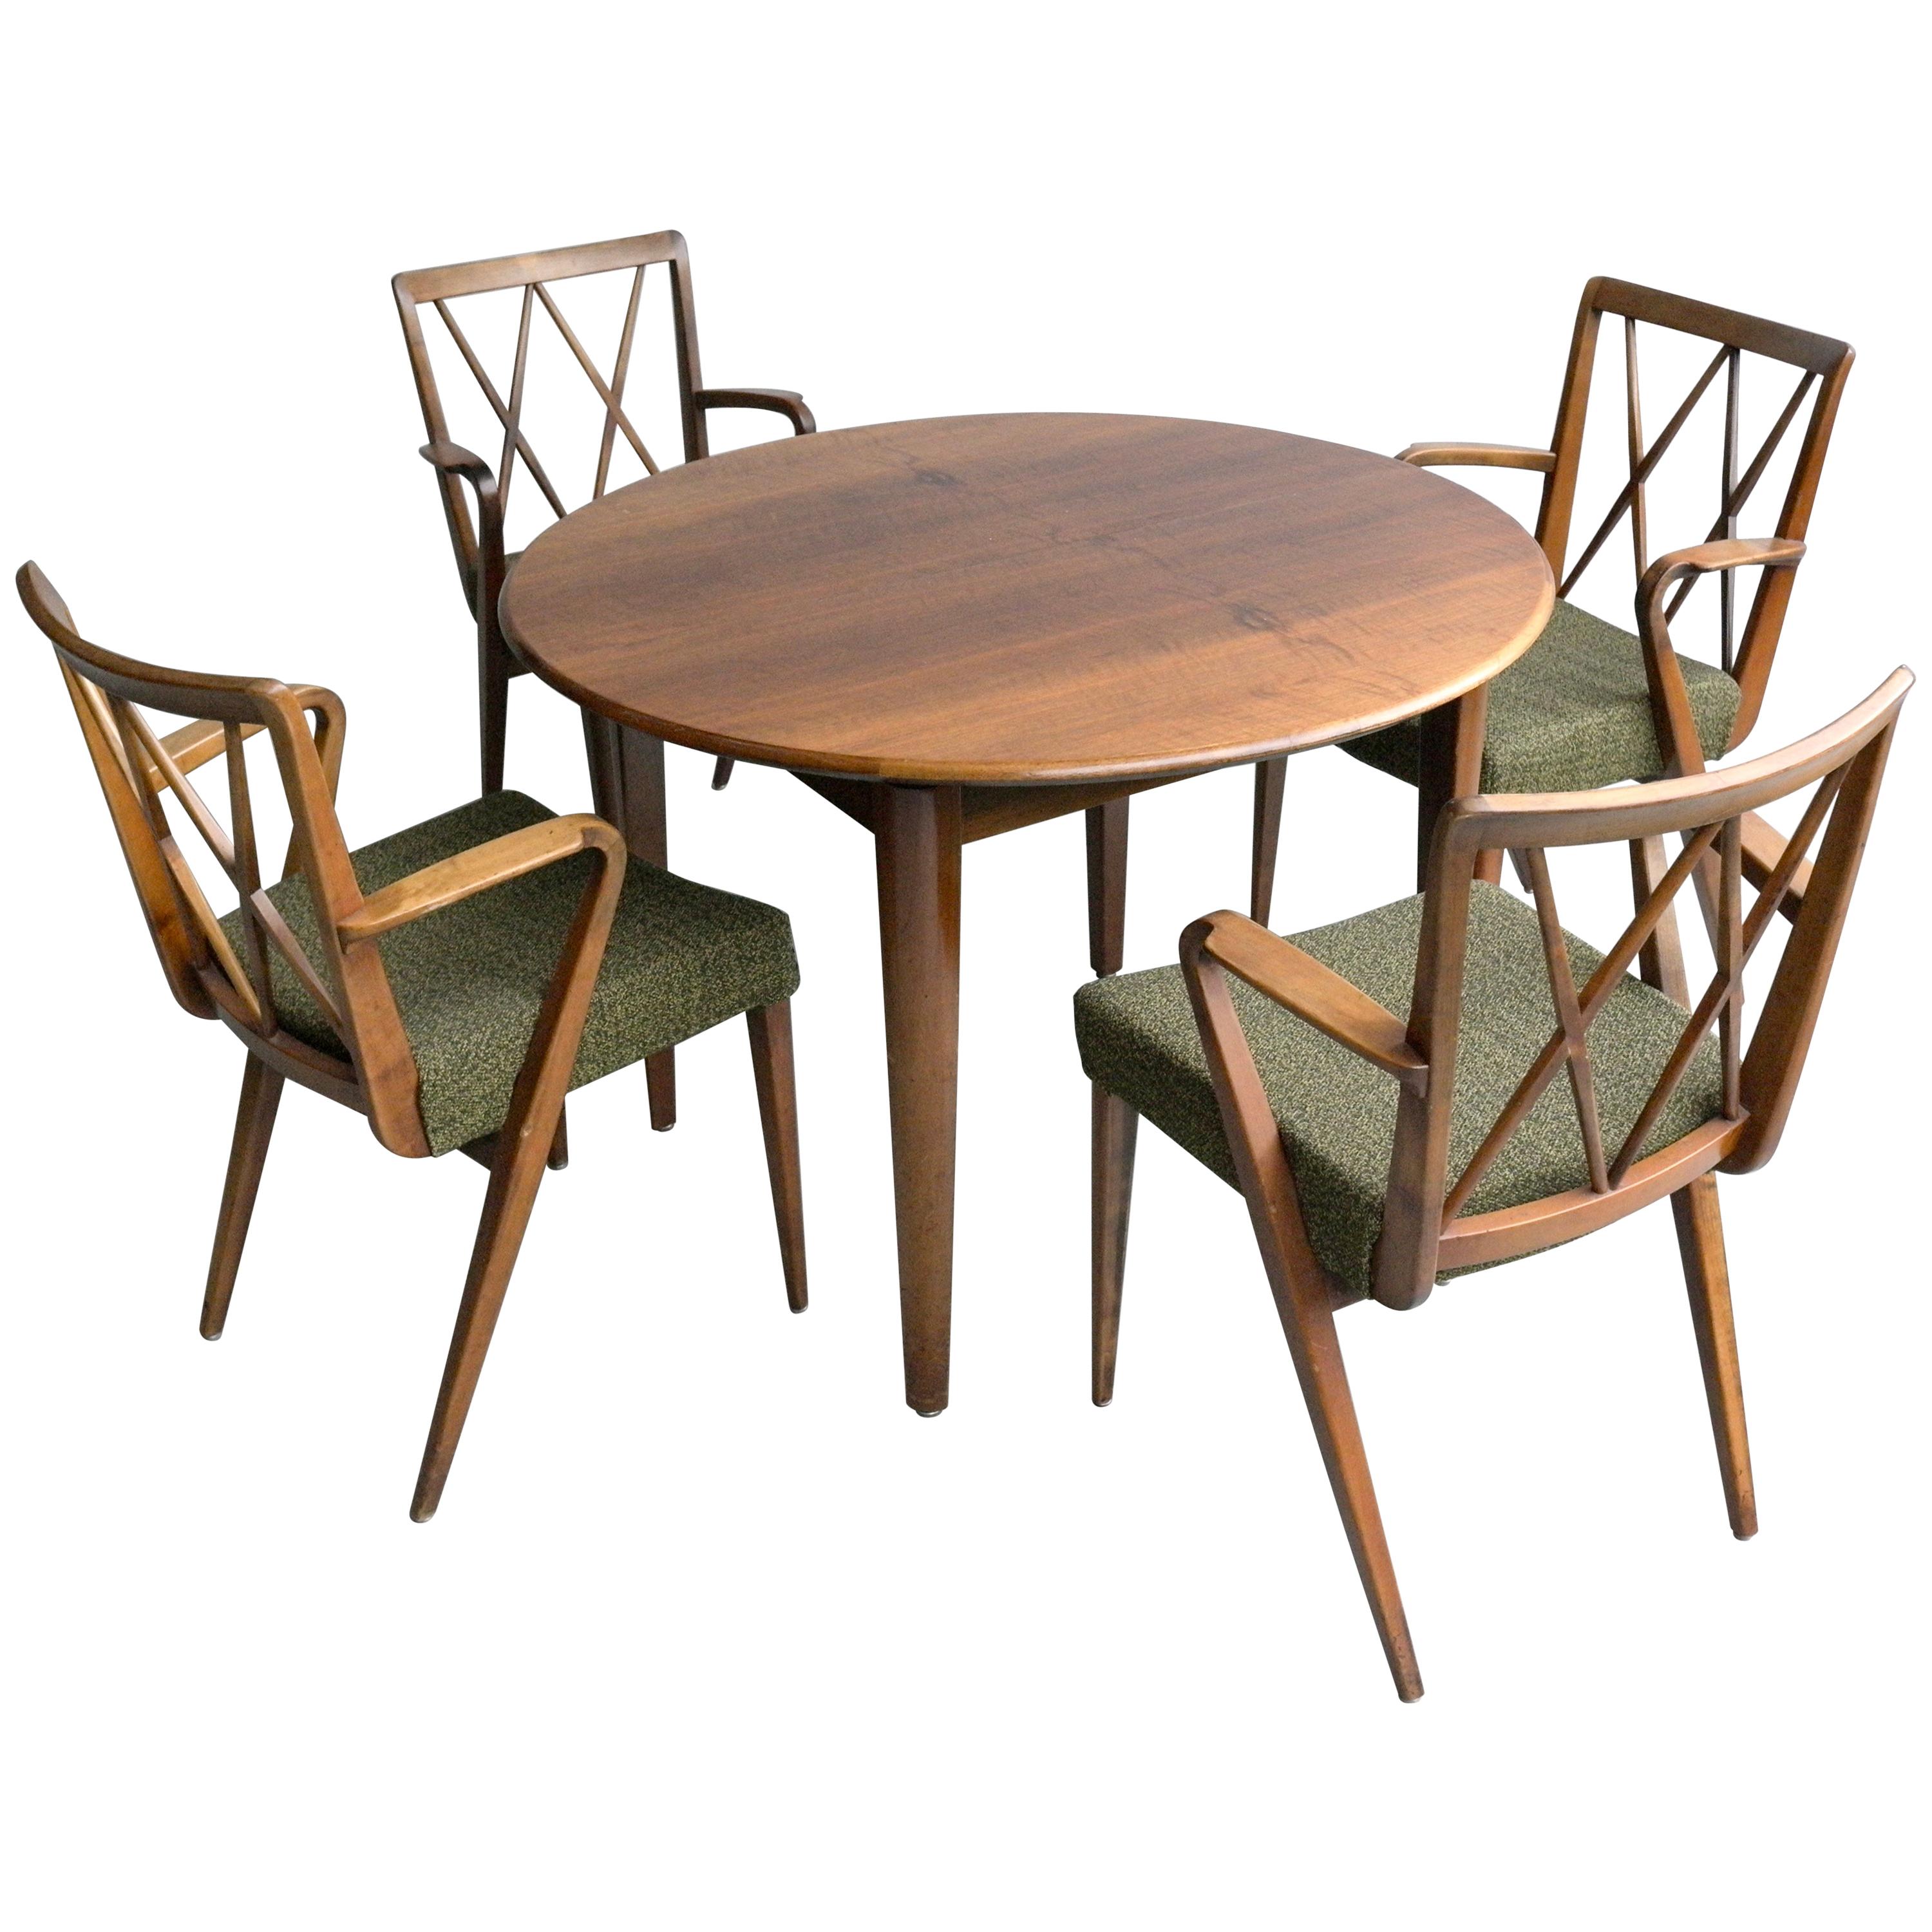 Abraham A Patijn Poly-Z Dining room set in Walnut, The Netherlands, 1950s